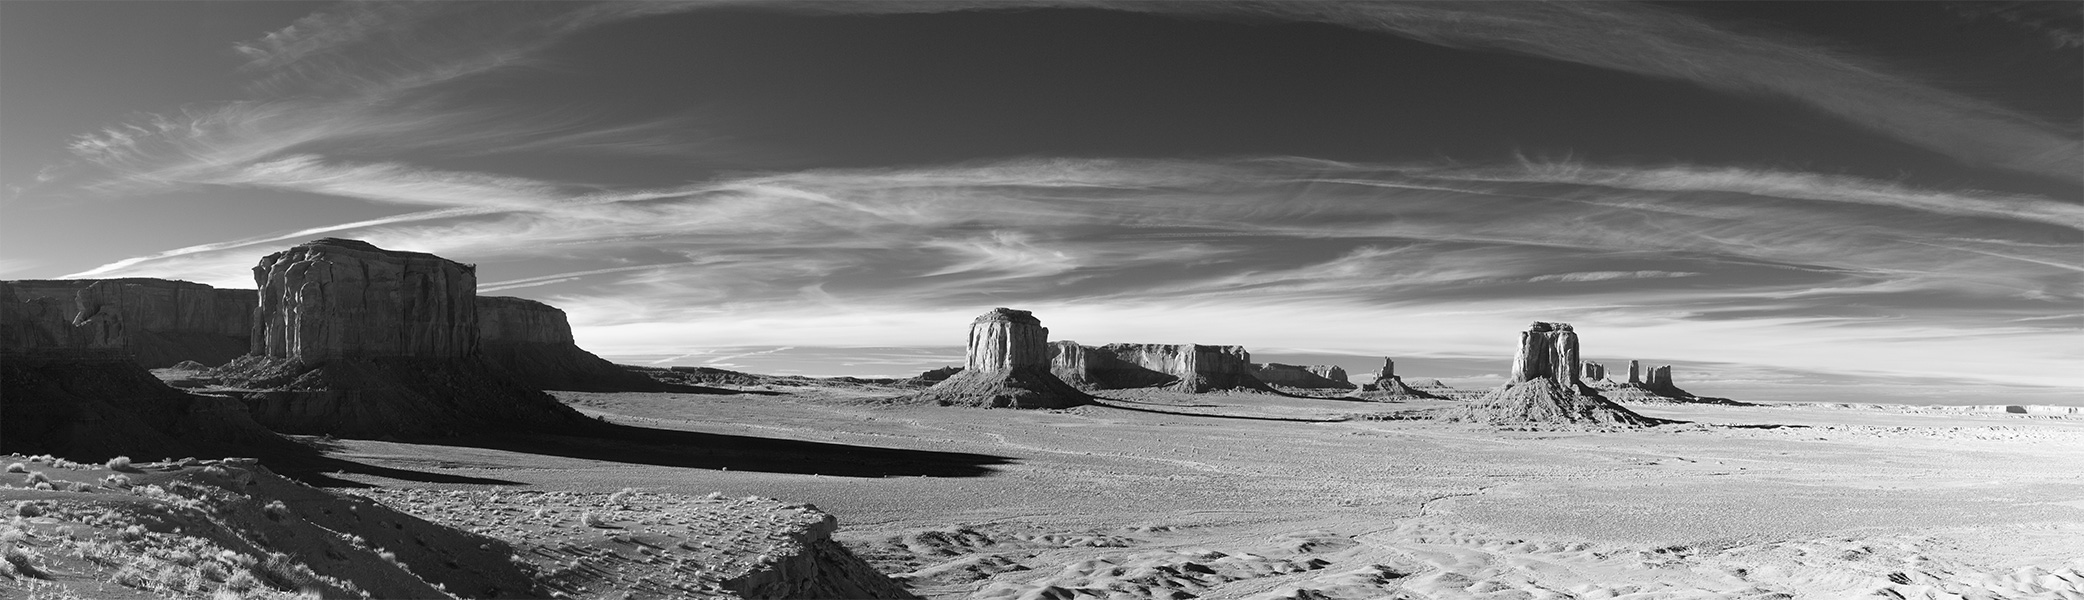 Very Dramatic Infrared Panorama of Extreme Western U.S. Landscape.